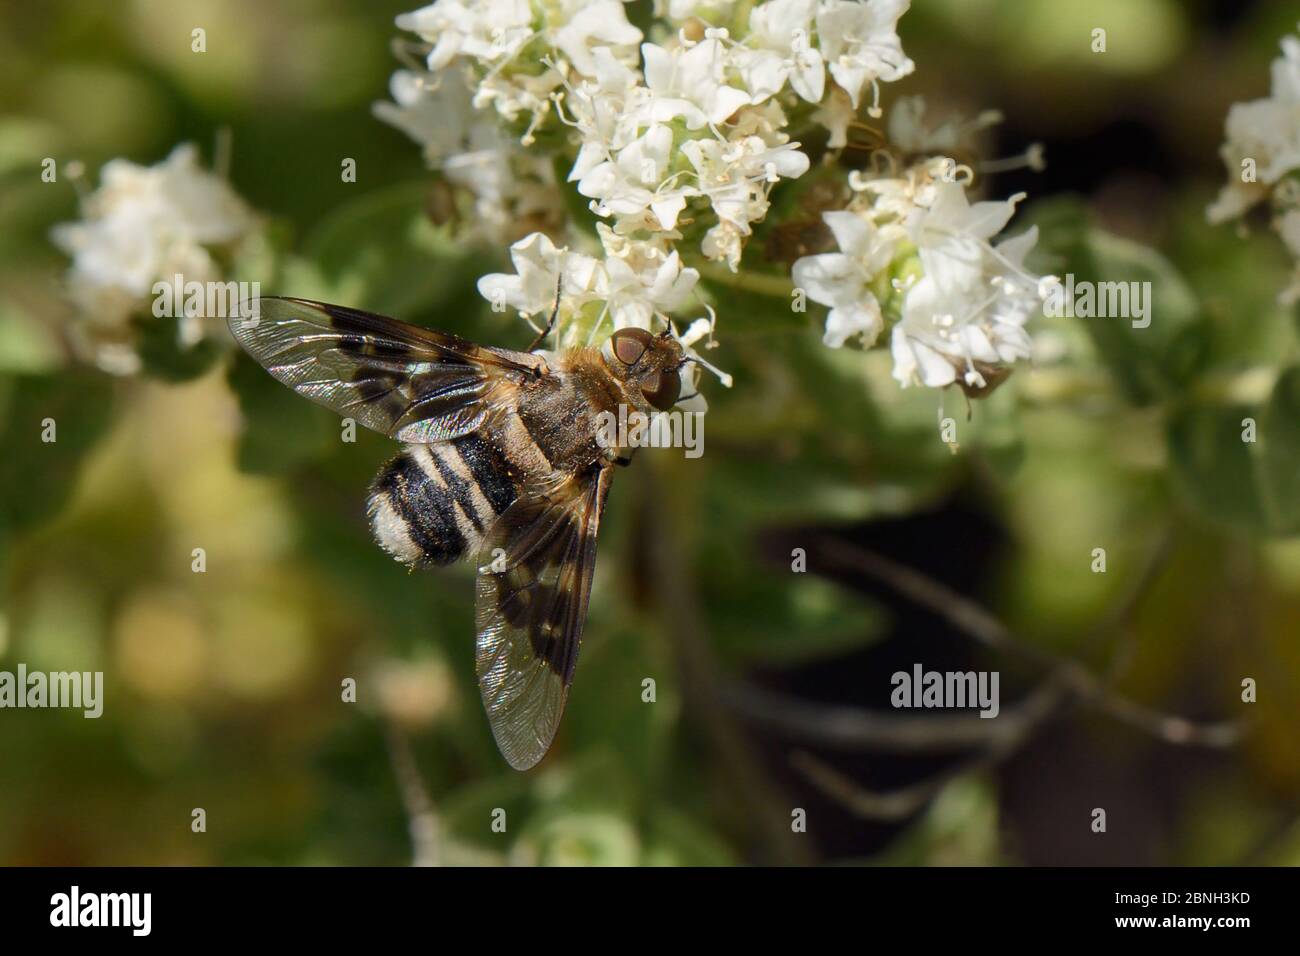 Bee fly (Thyridanthrax perspicillaris) with strongly patterned wings, feeding on Cretan oregano flowers (Origanum onites), Lesbos / Lesvos, Greece, Ma Stock Photo